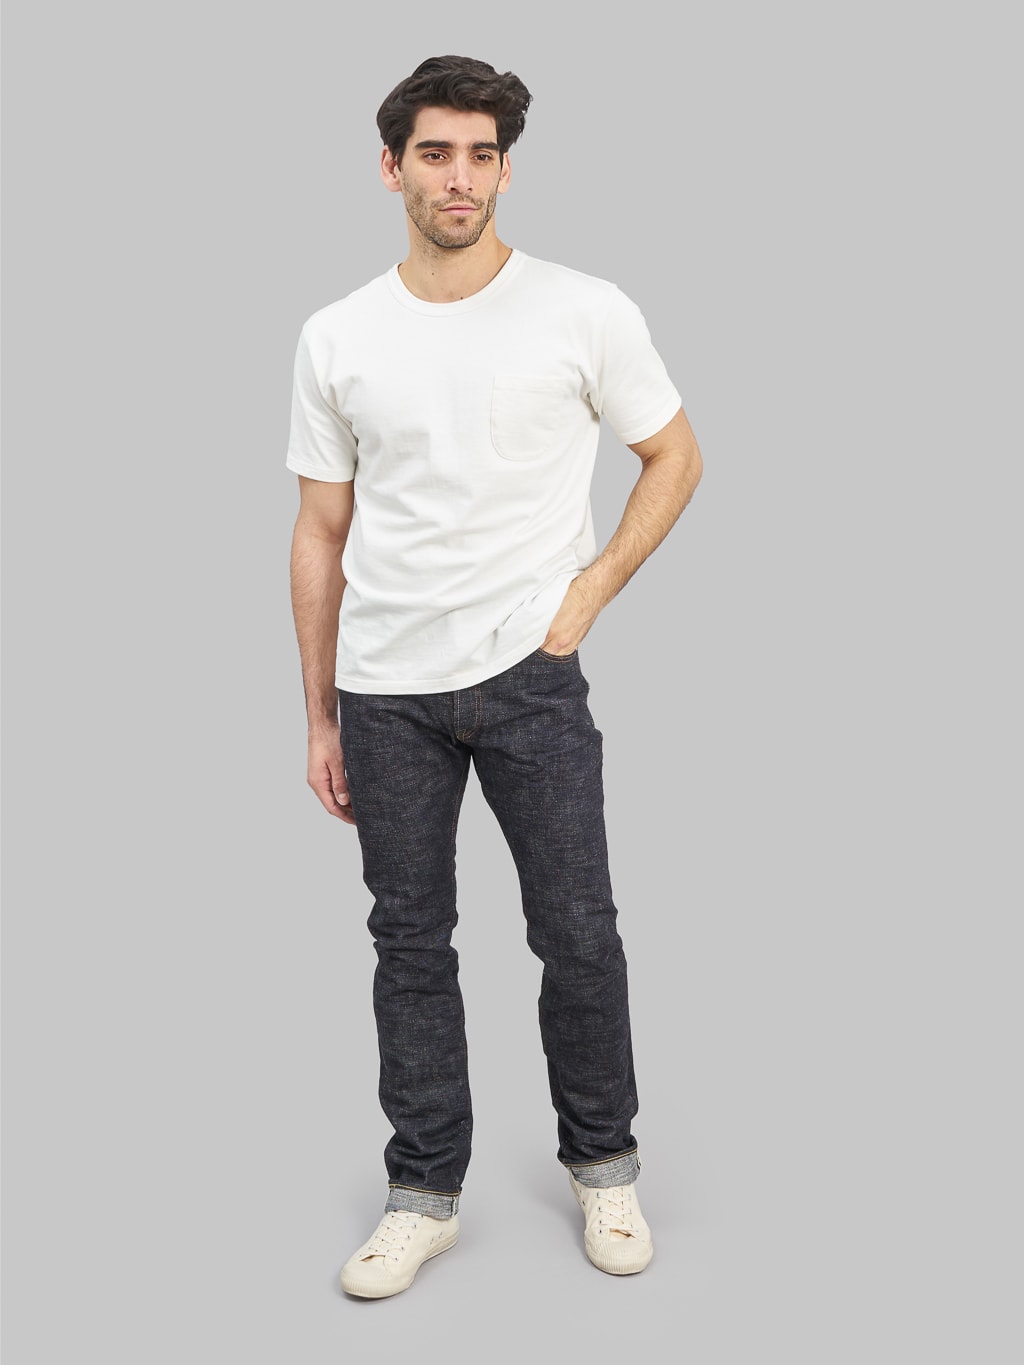 The Strike Gold 7109 Ultra Slubby Slim Tapered Jeans style